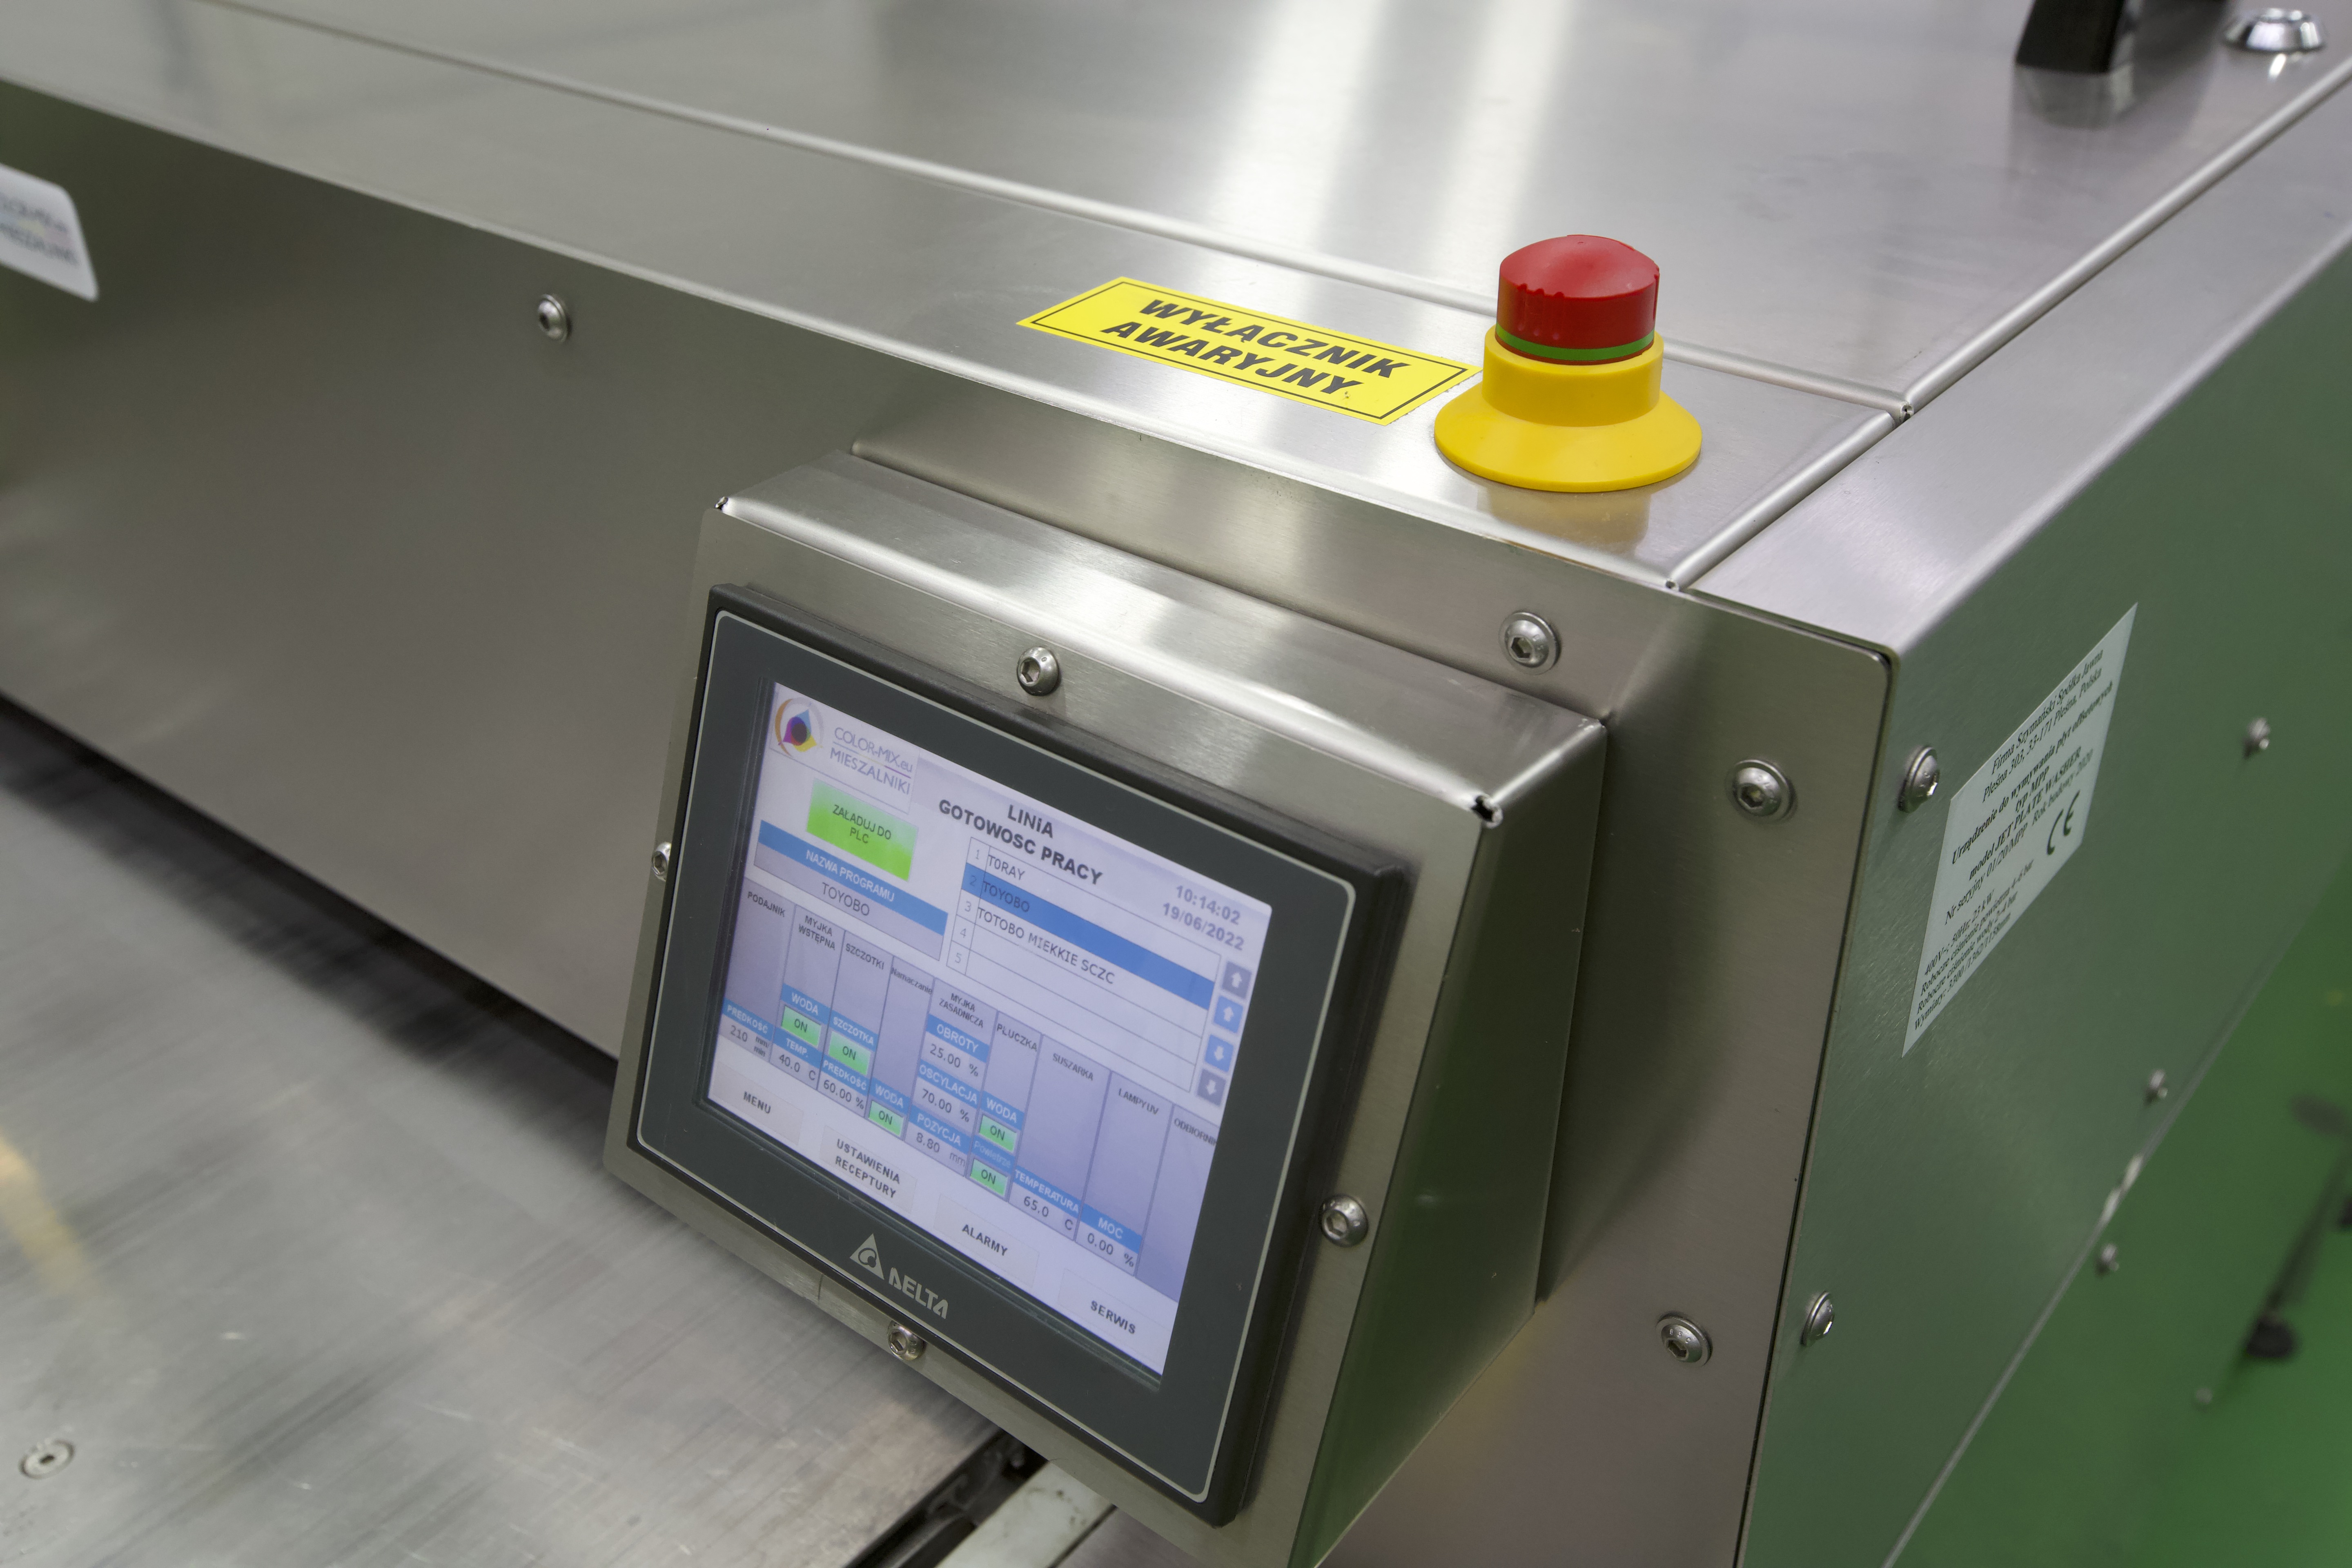 Operating LCD touch screen panel in jetplatewasher